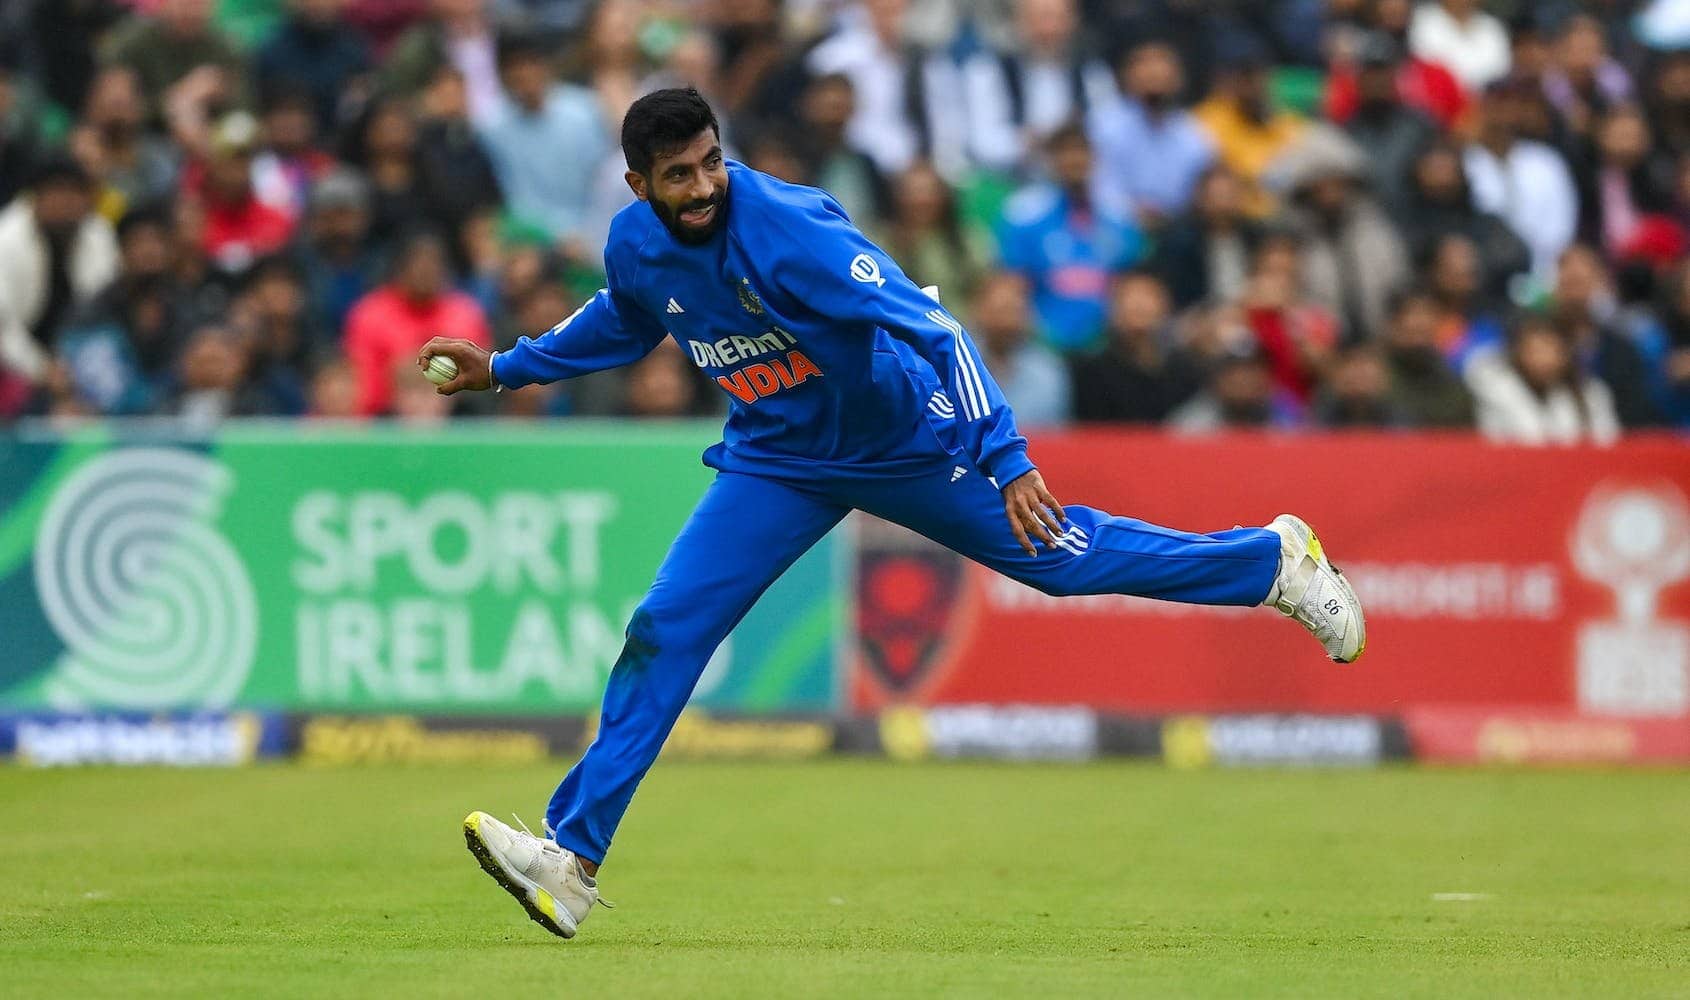 Jasprit Bumrah Creates History by Achieving 'This' Remarkable Feat On T20I Captaincy Debut